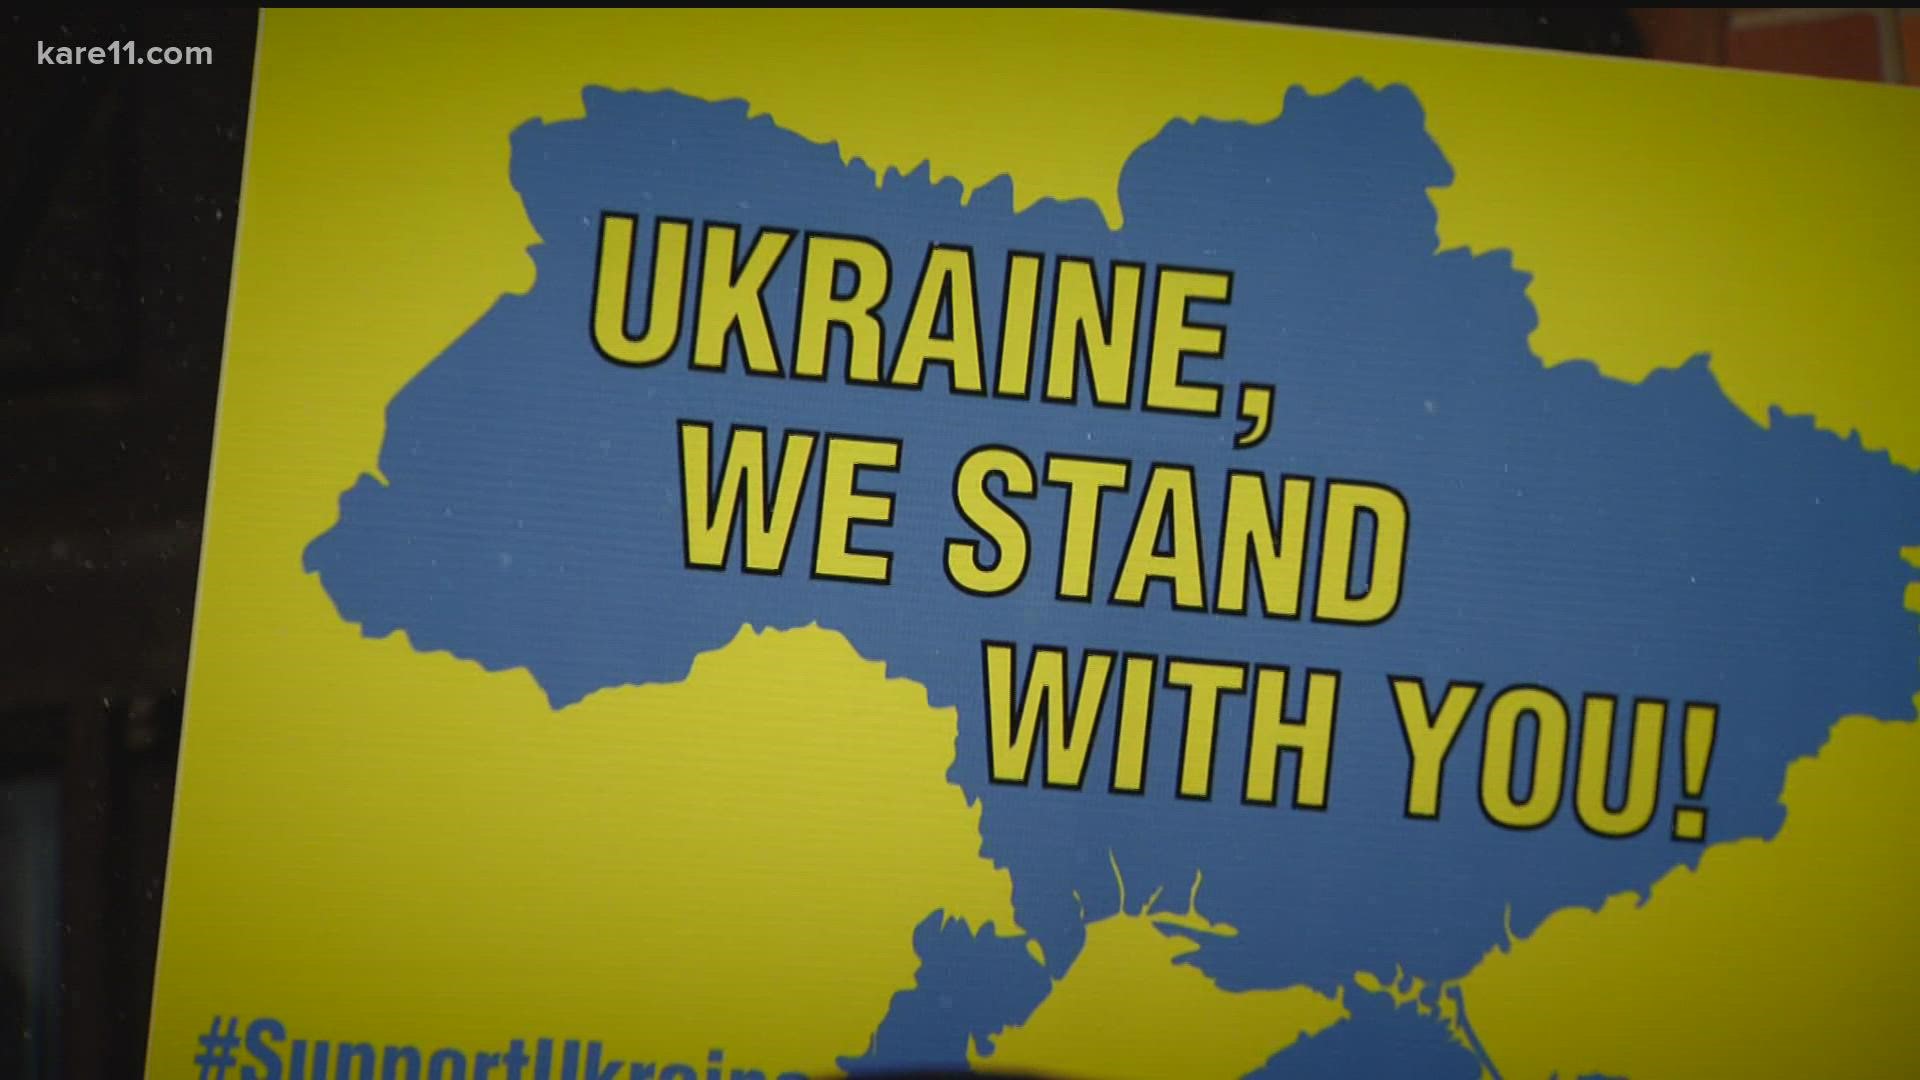 Ukrainian-Americans in Minnesota are denouncing the Russian aggression, calling Ukraine a peaceful and innocent neighbor.